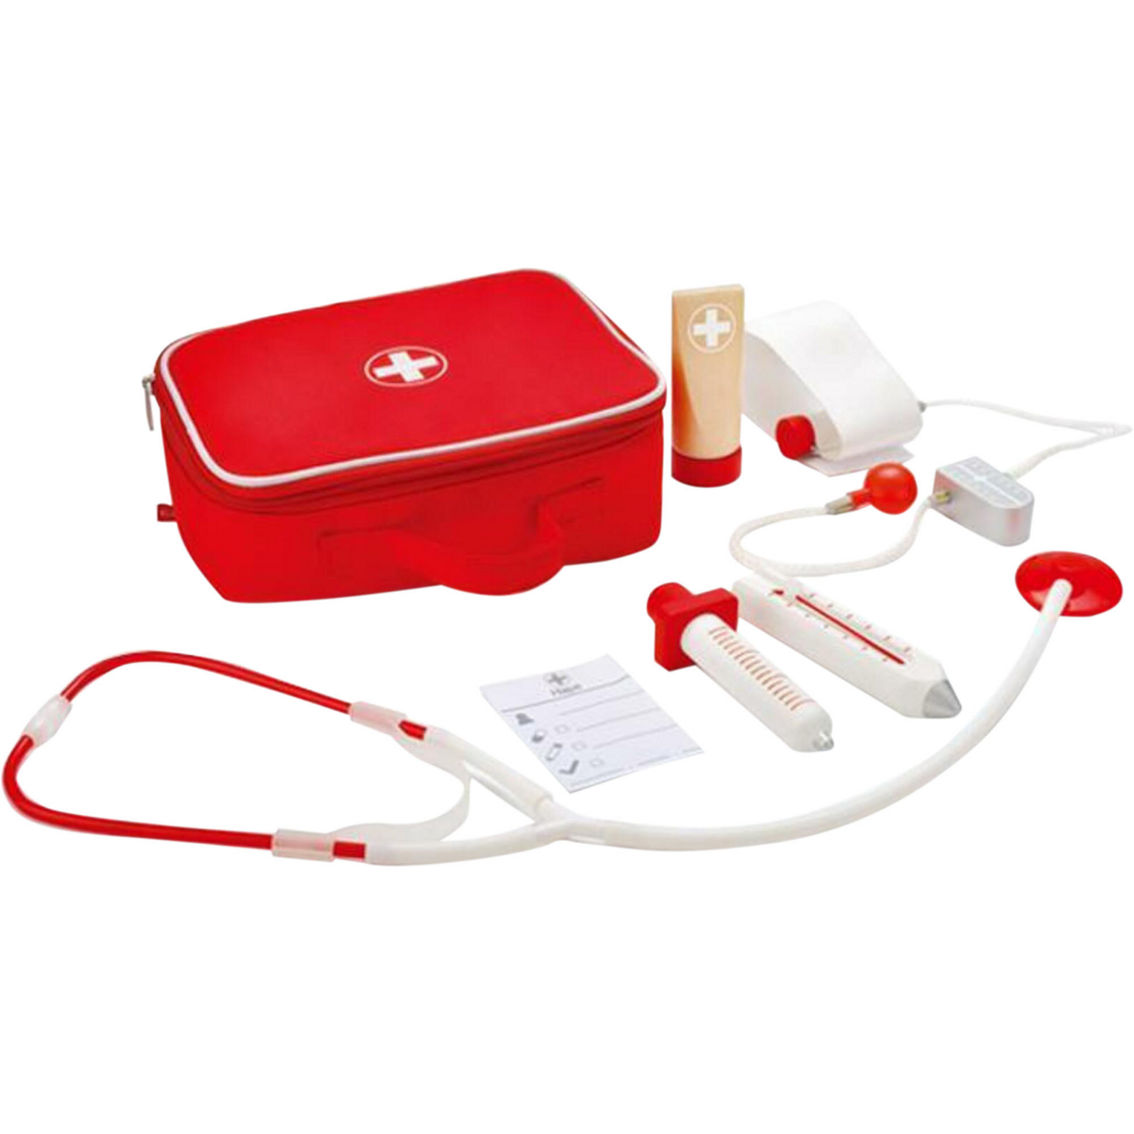 Doctor on Call Wooden Roleplay and Accessory Set - Image 2 of 5